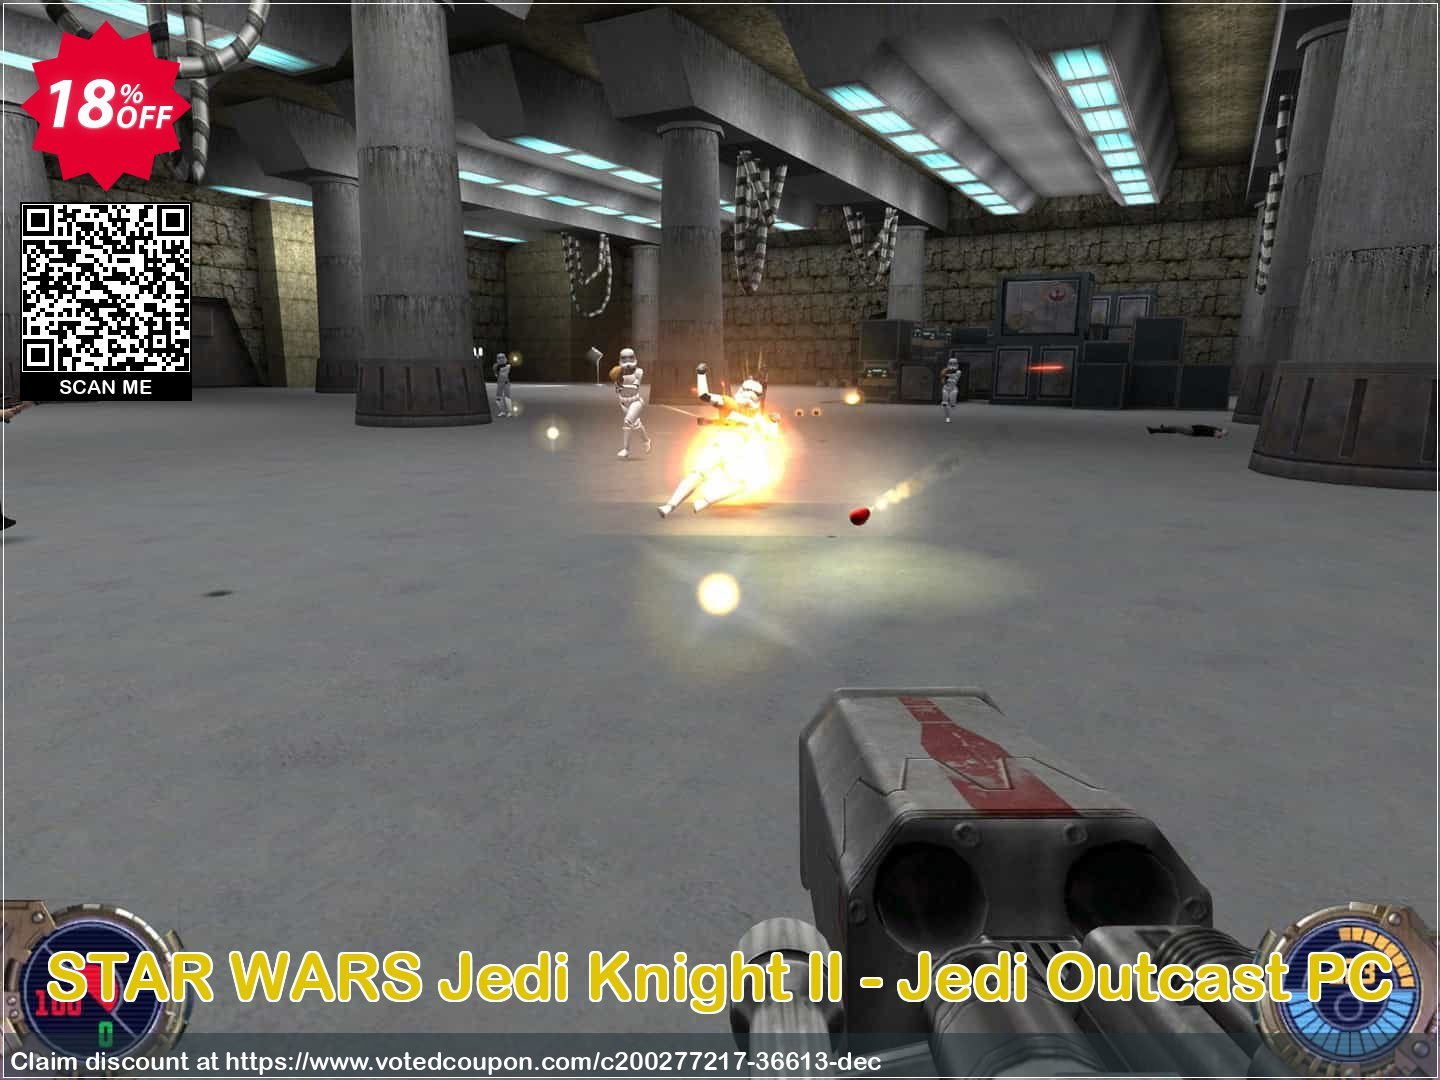 STAR WARS Jedi Knight II - Jedi Outcast PC Coupon Code May 2024, 18% OFF - VotedCoupon